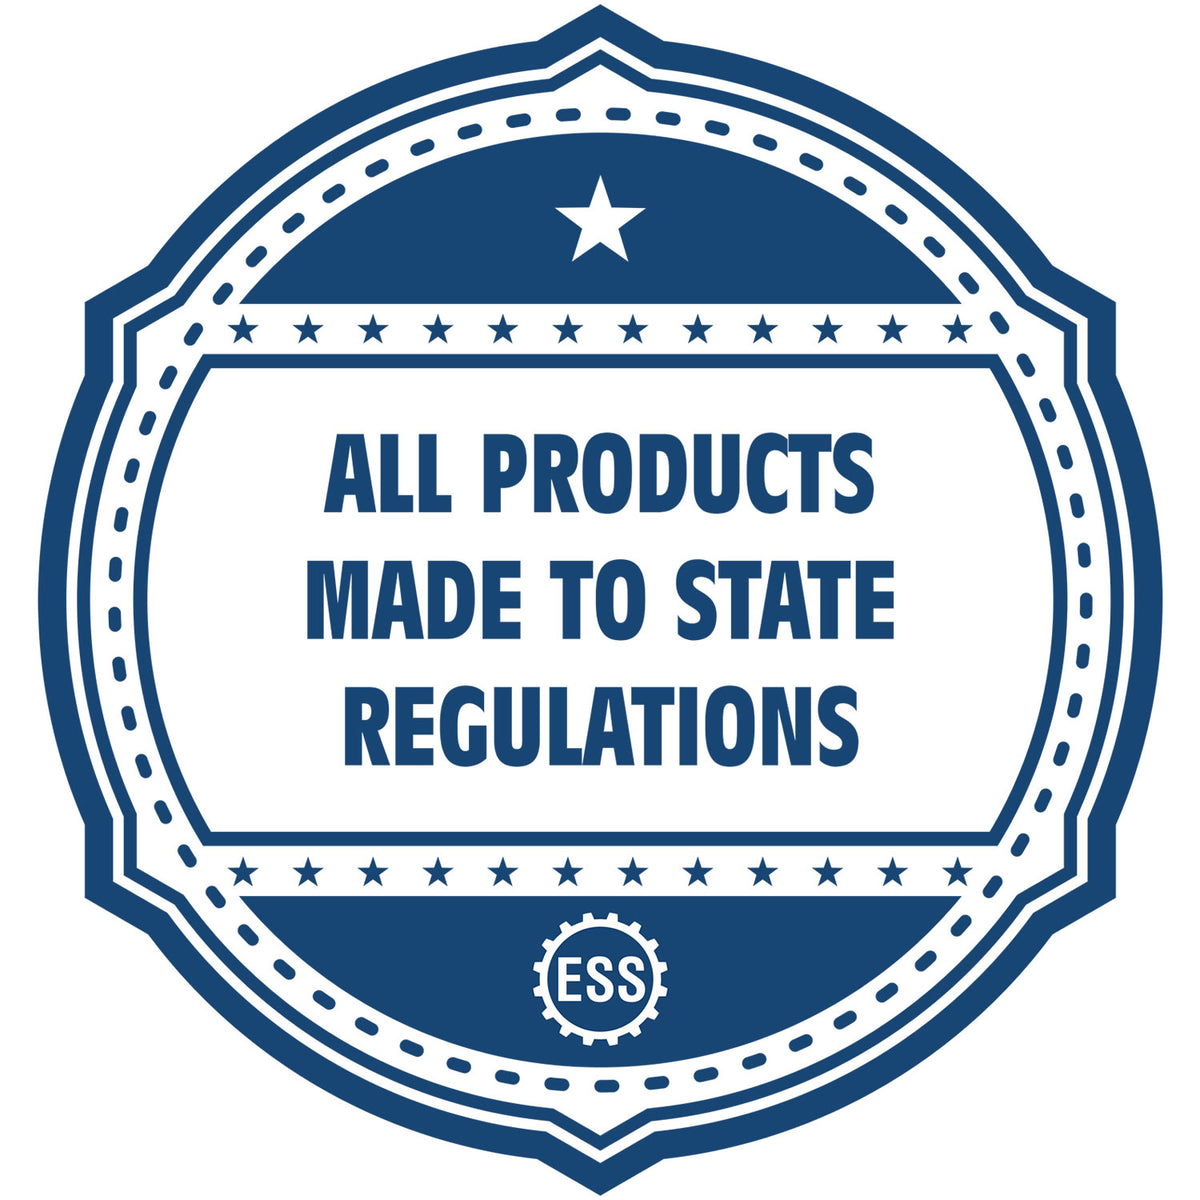 An icon or badge element for the Slim Pre-Inked Pennsylvania Landscape Architect Seal Stamp showing that this product is made in compliance with state regulations.